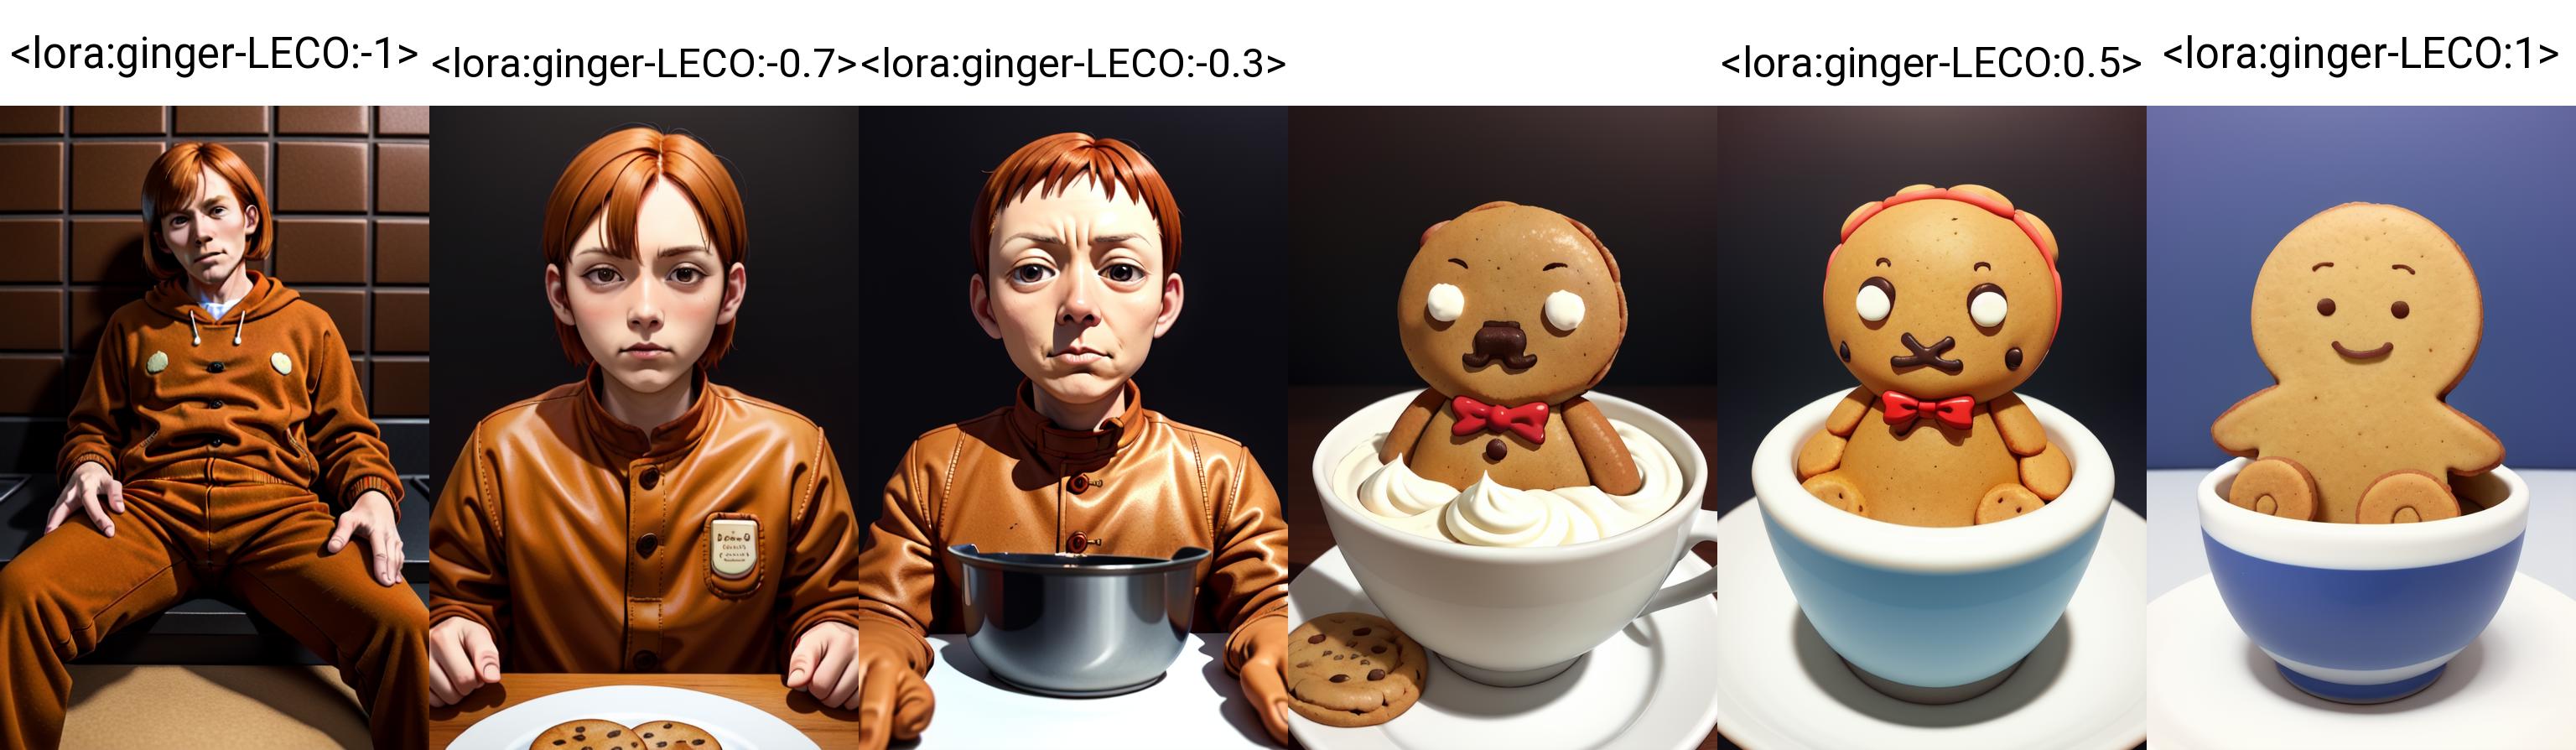 Ginger-LECO for Gingerbread Man image by Liquidn2